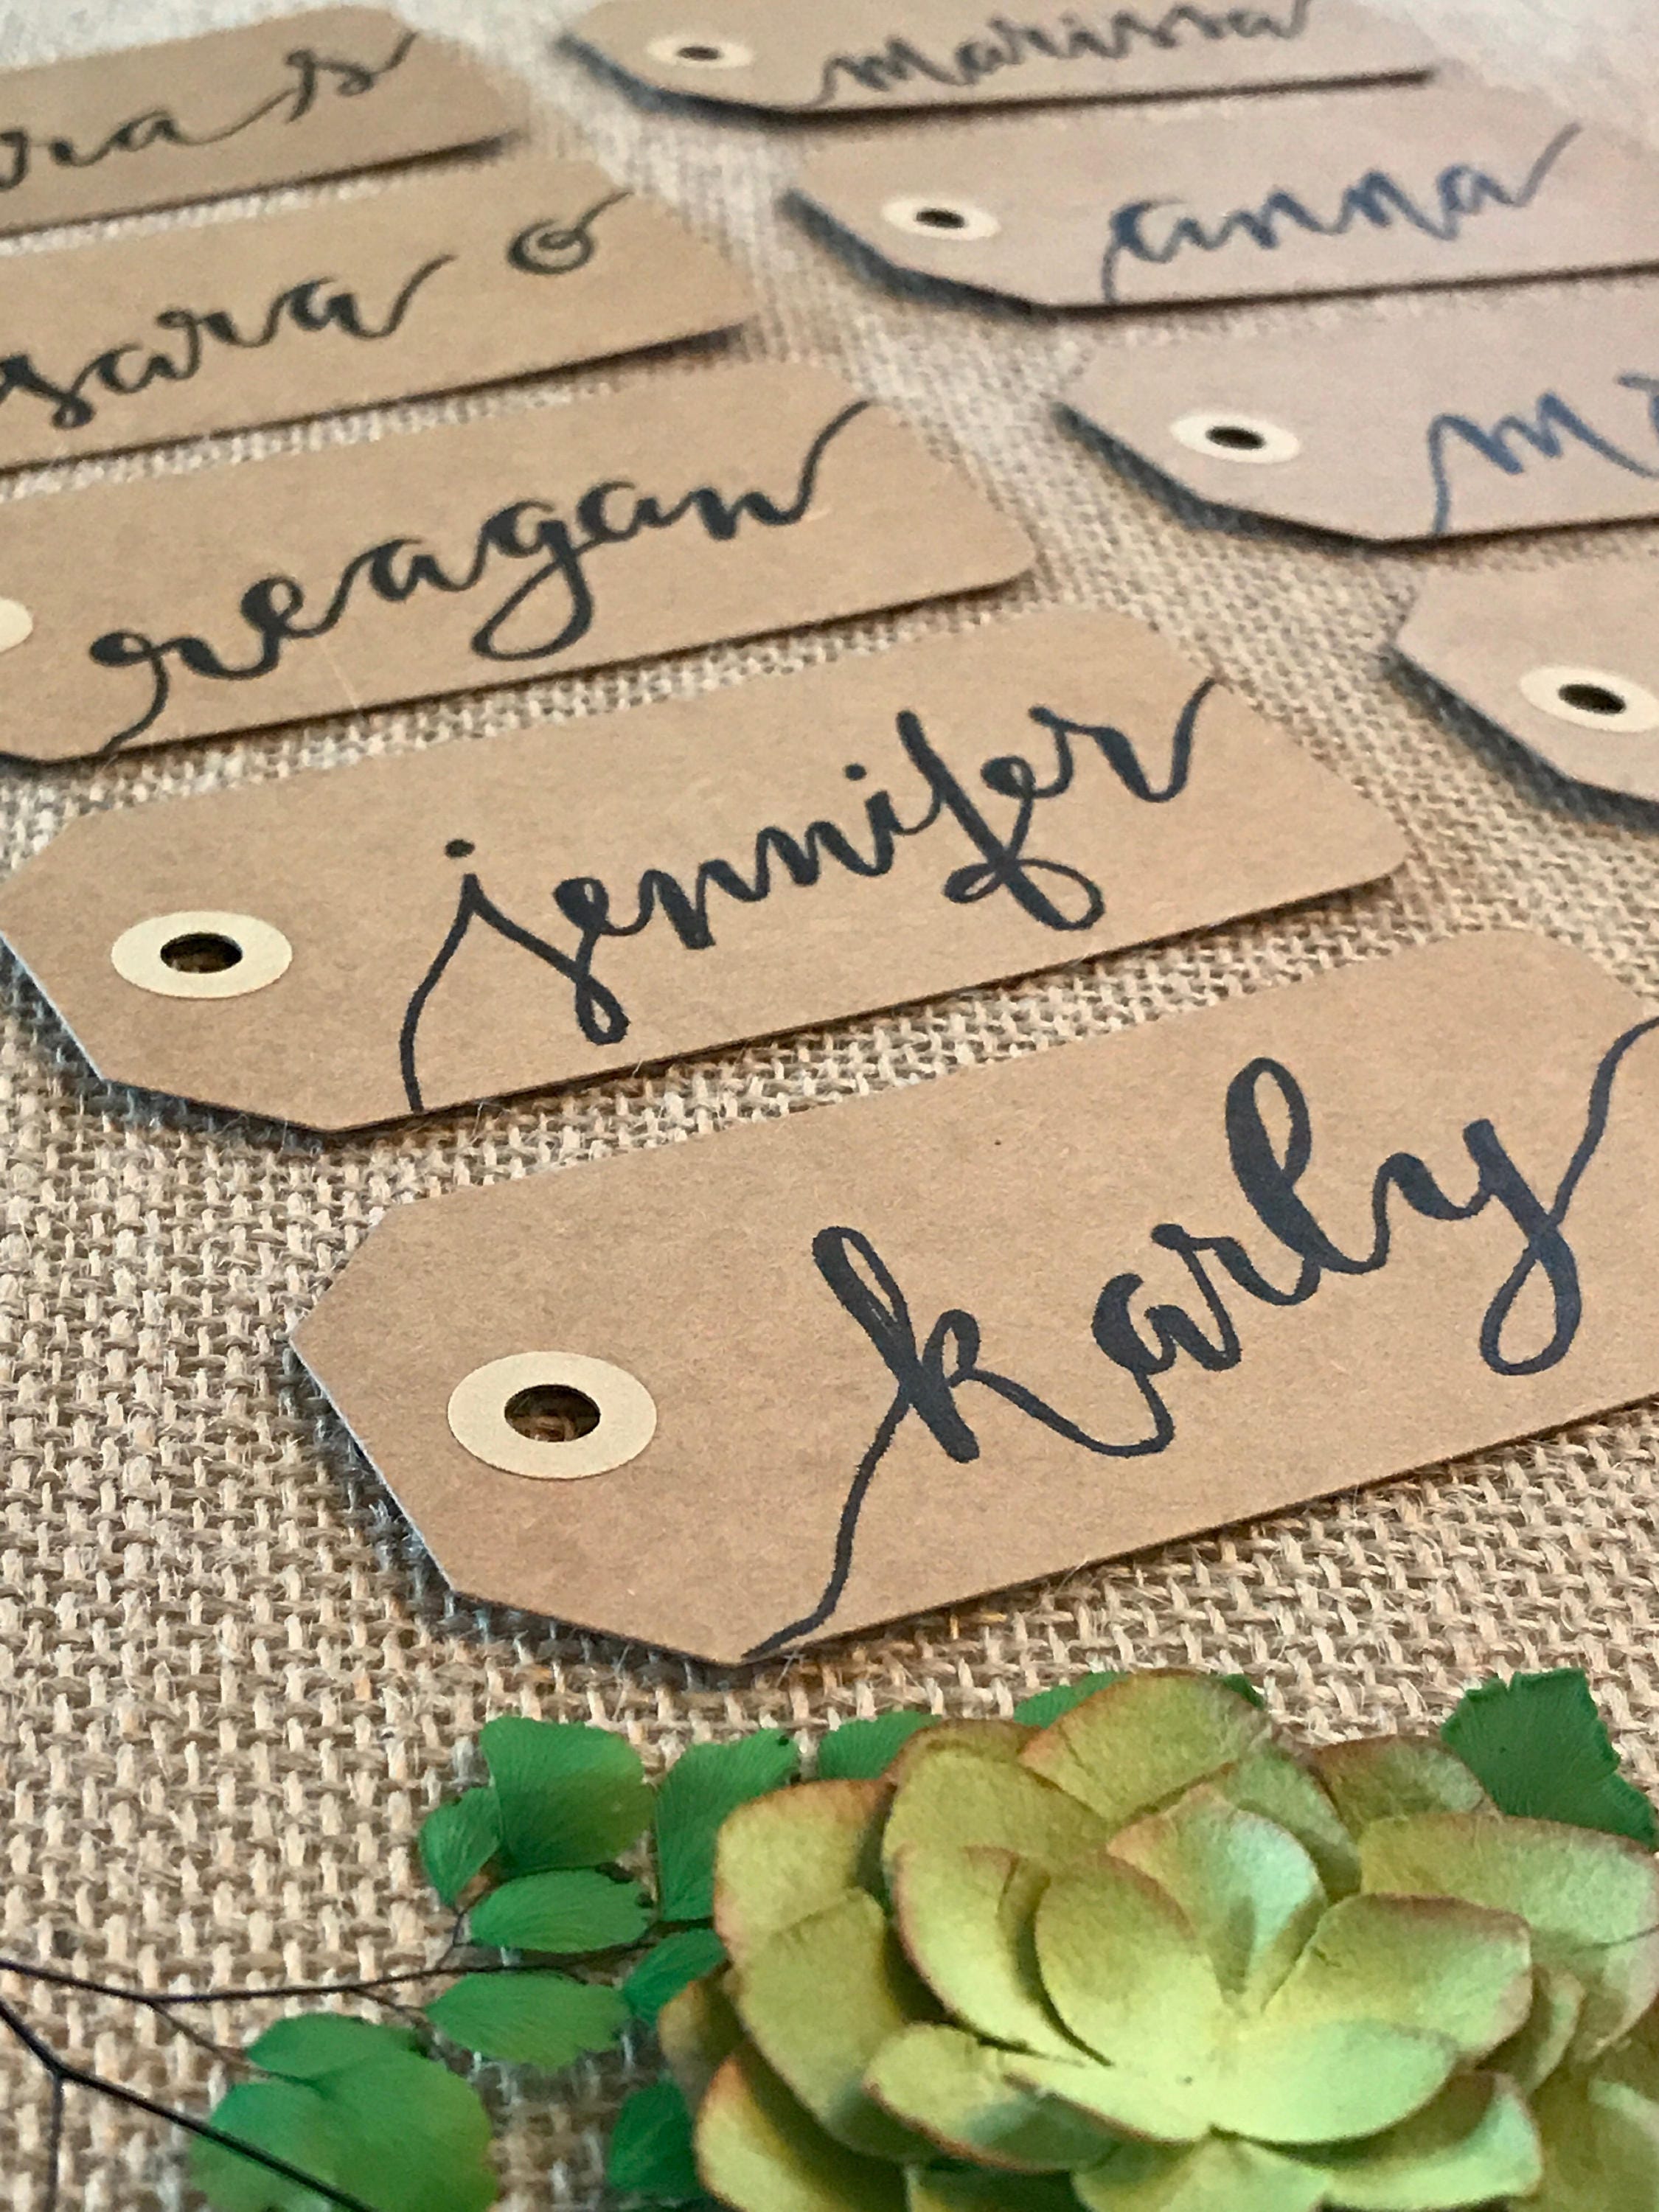 CUSTOM CALLIGRAPHY Cardstock Gift Tags/Reserved Seating Tags / Name Tags /  Personalized/Great for reserving wedding rows or custom gift tags